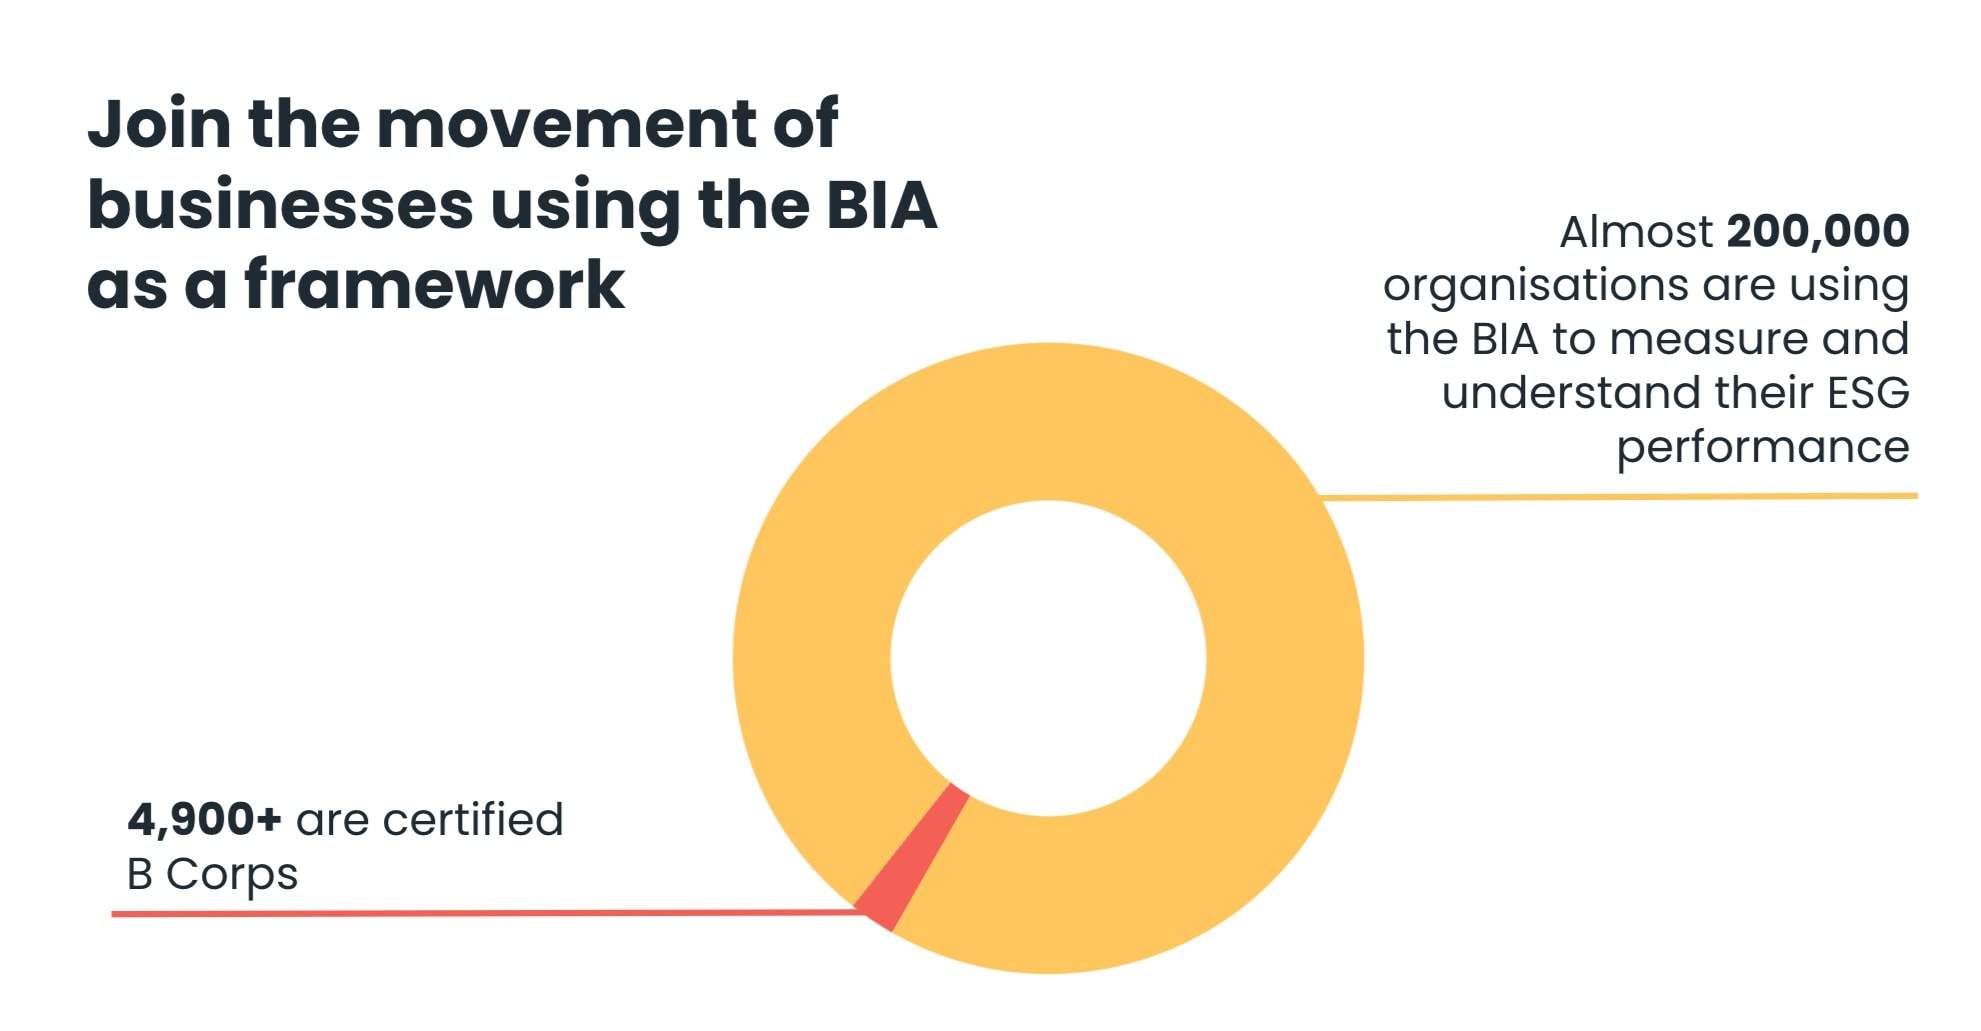 Join the movement of businesses using the BIA as a framework